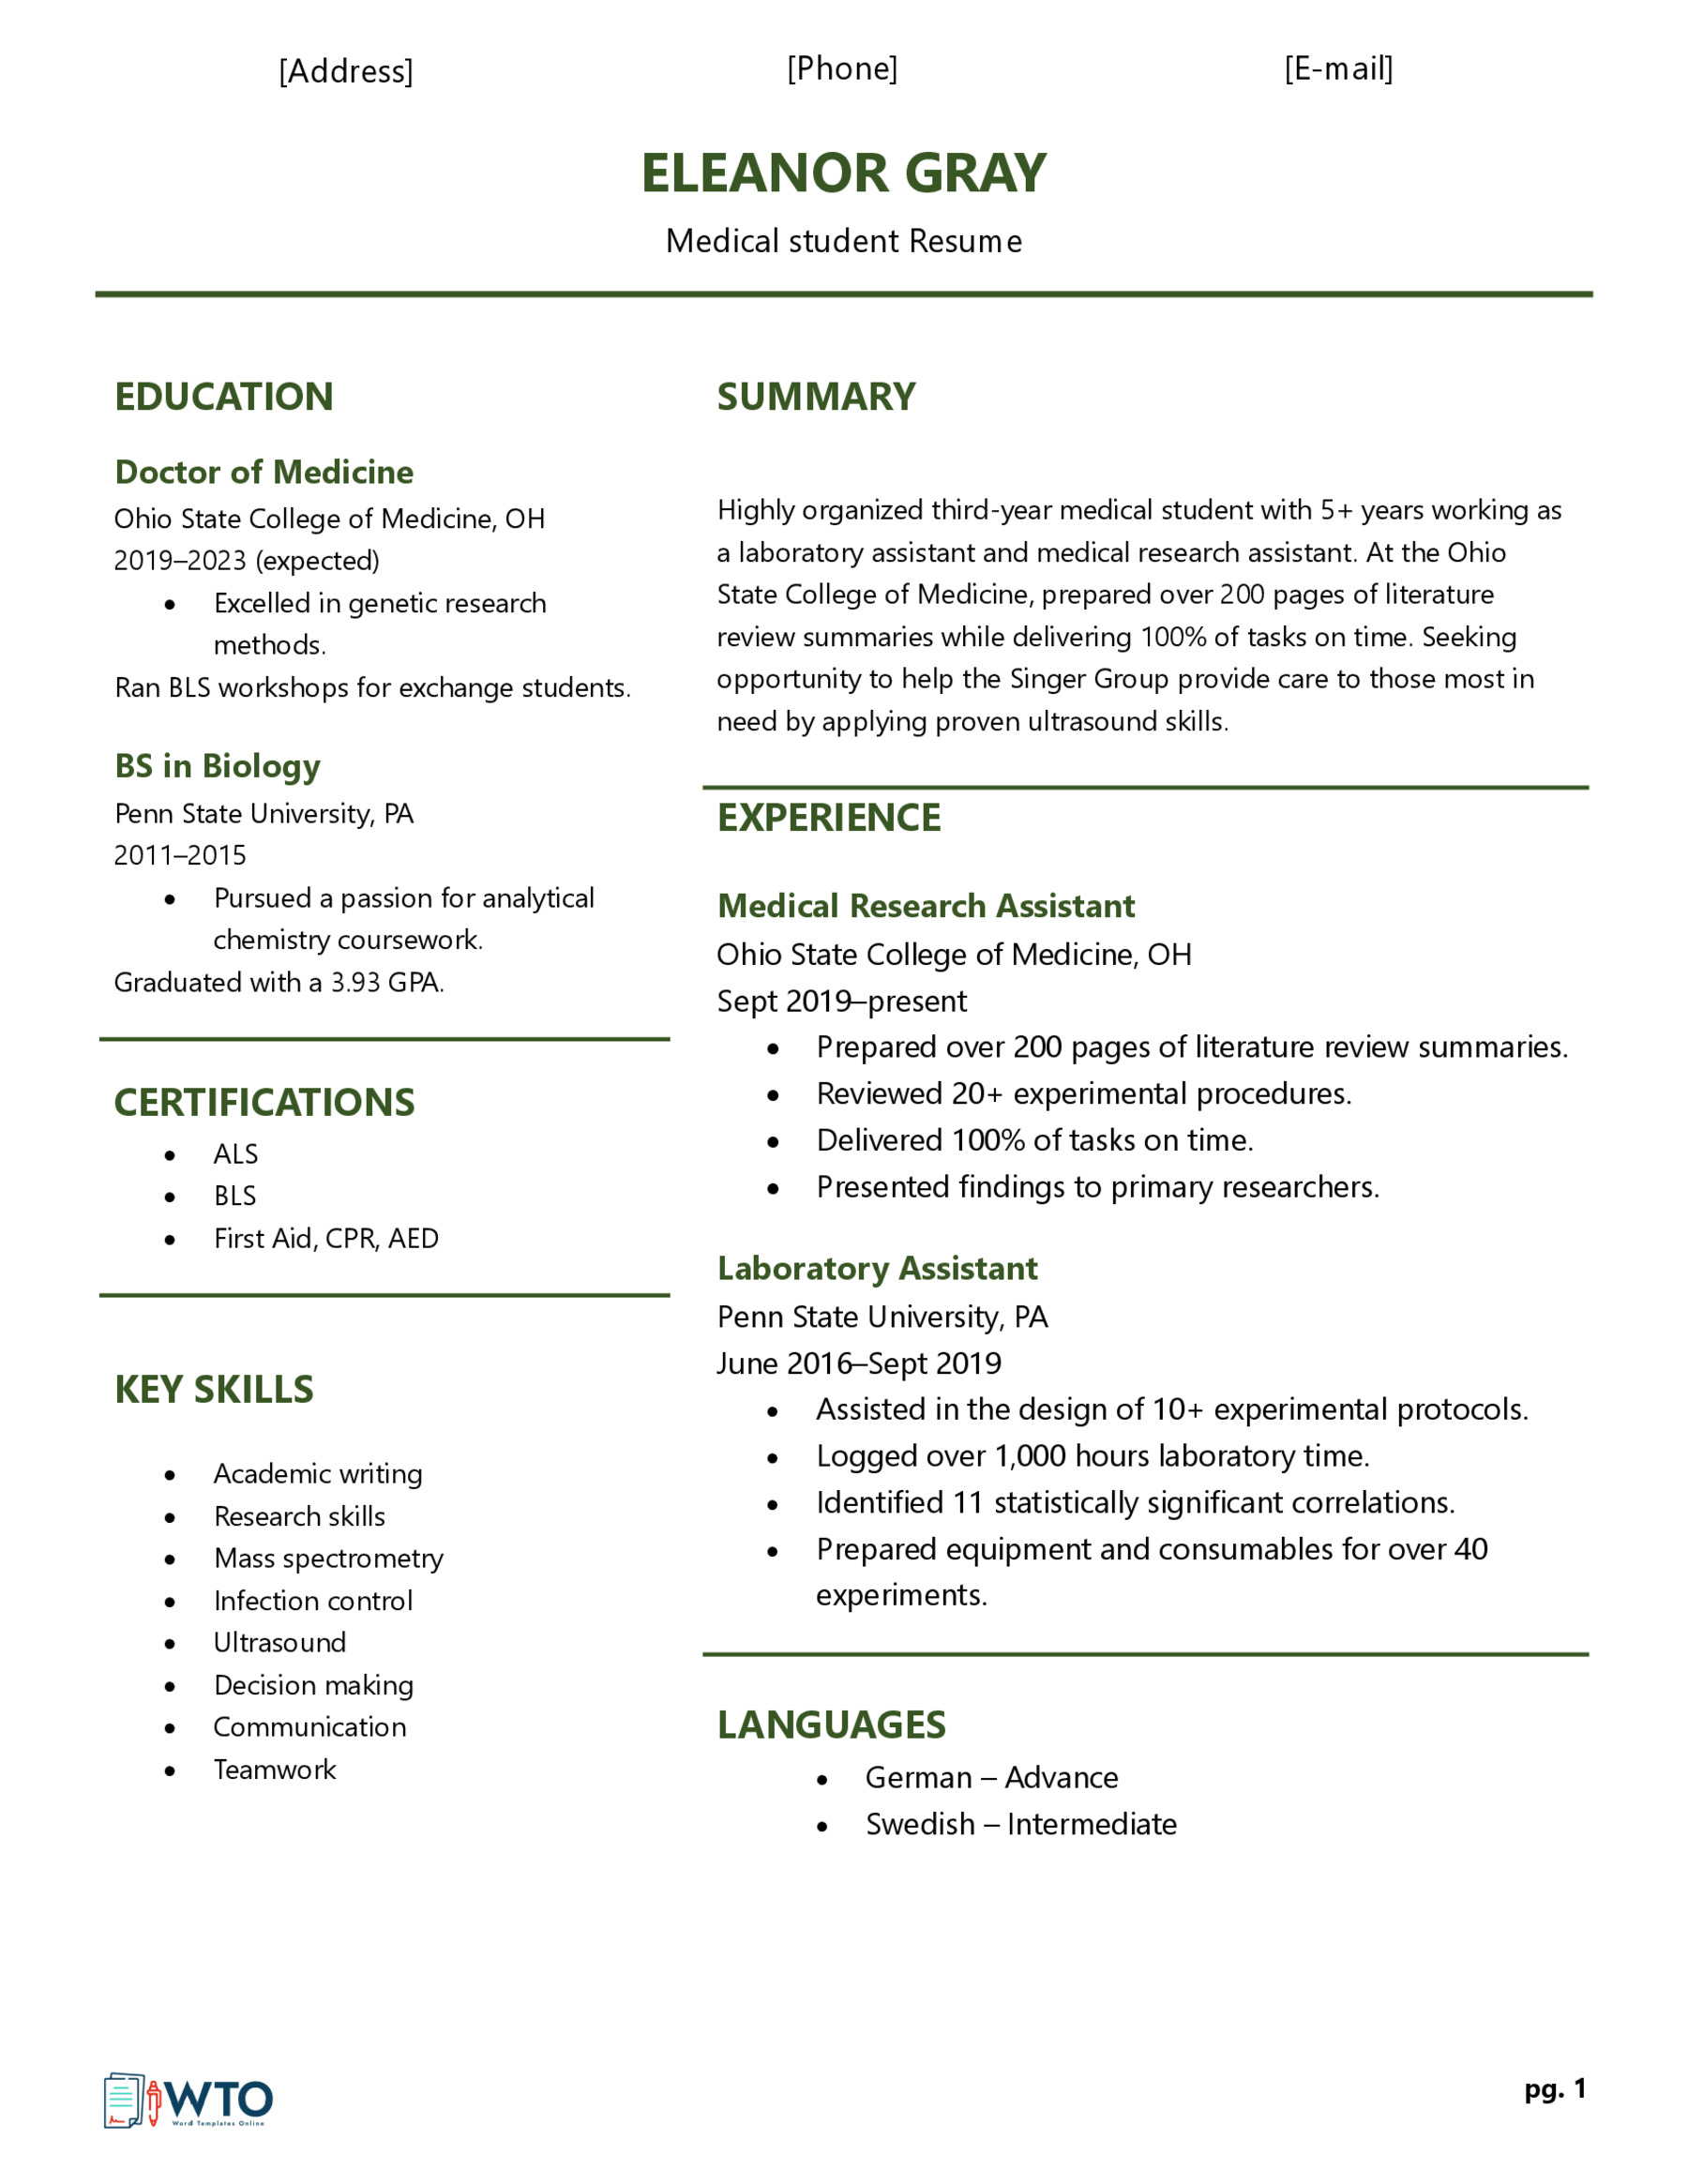 Medical Students Resume Template - Simple and Clean Design